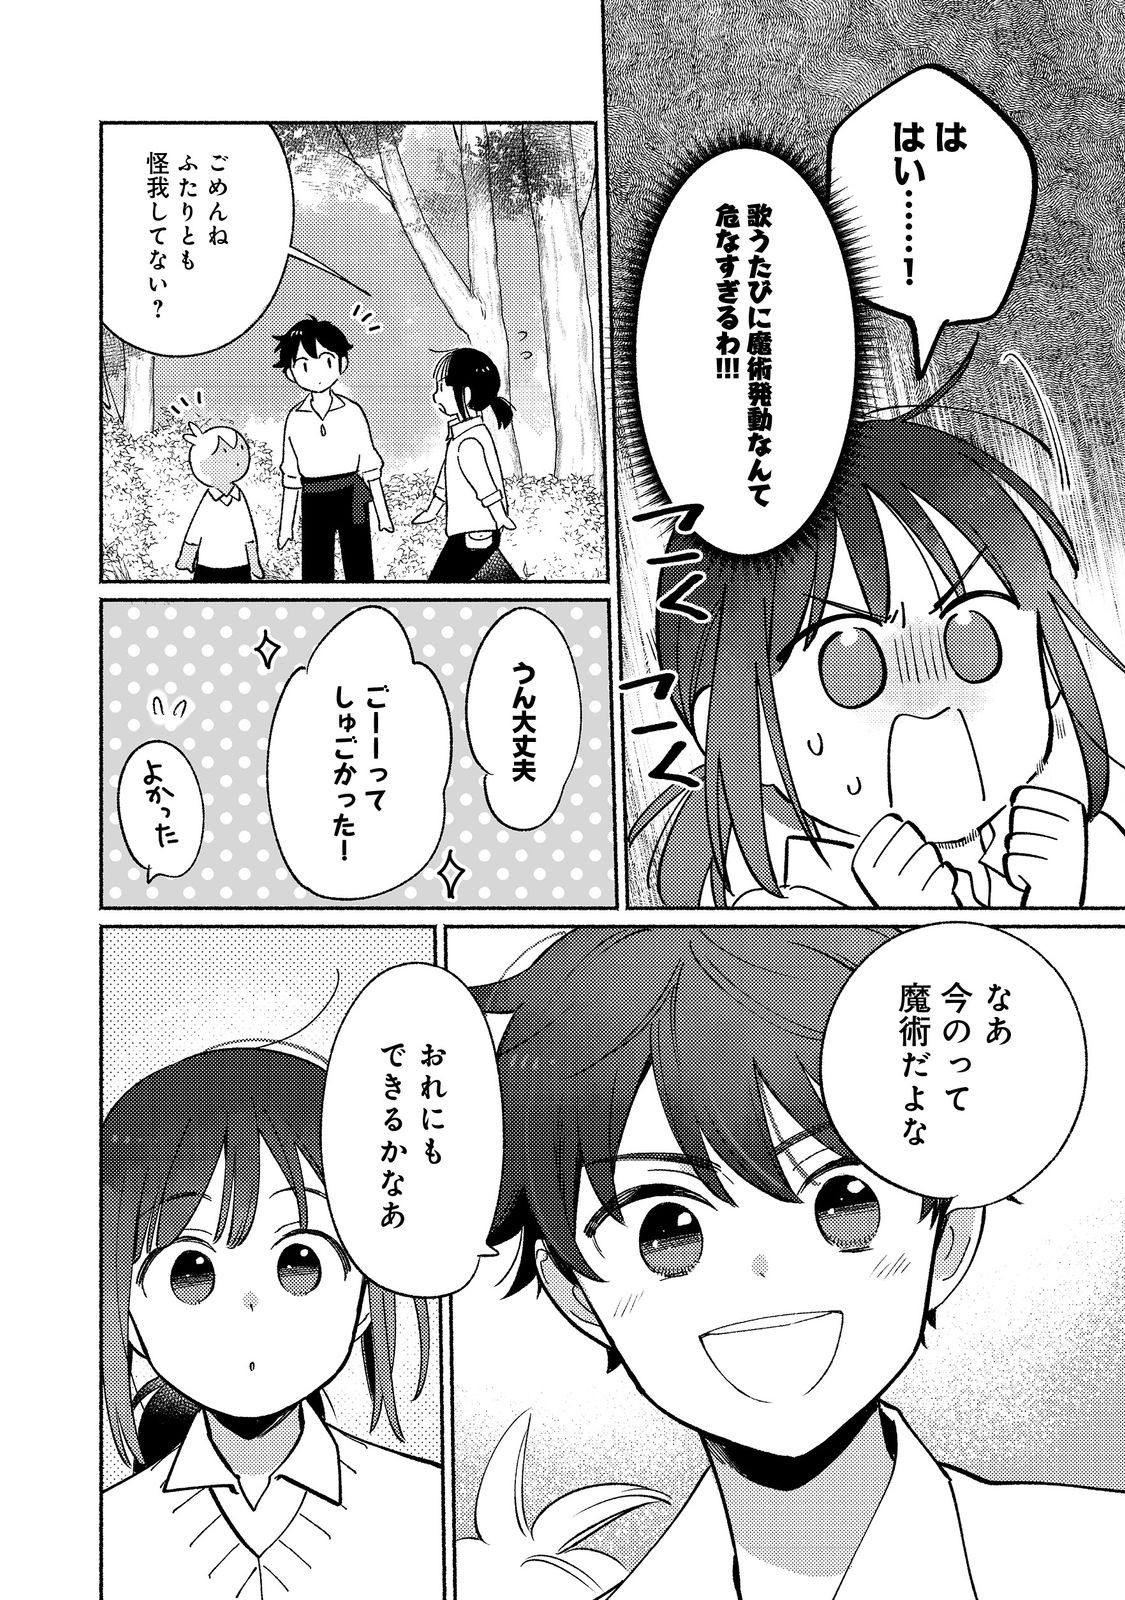 I’m the White Pig Nobleman 第18.2話 - Page 9